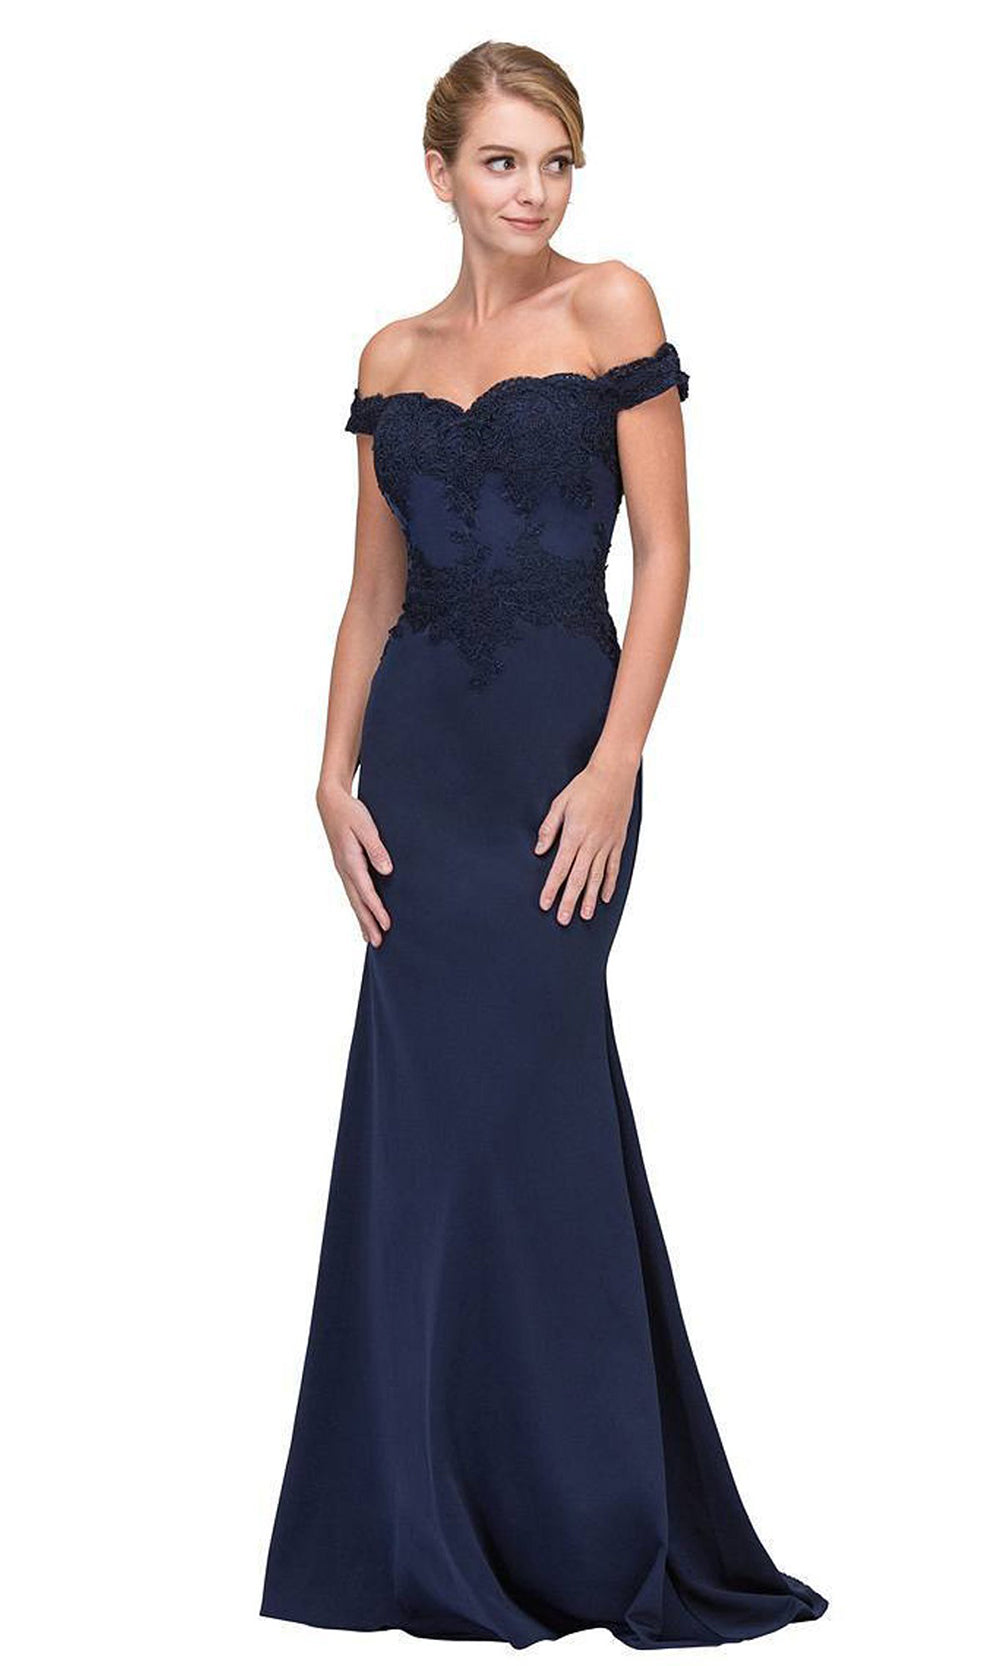 Eureka Fashion - Off Shoulder Lace Appliqued Jersey Mermaid Gown 7100 - 1 pc Burgundy In Size S Available CCSALE S / Navy